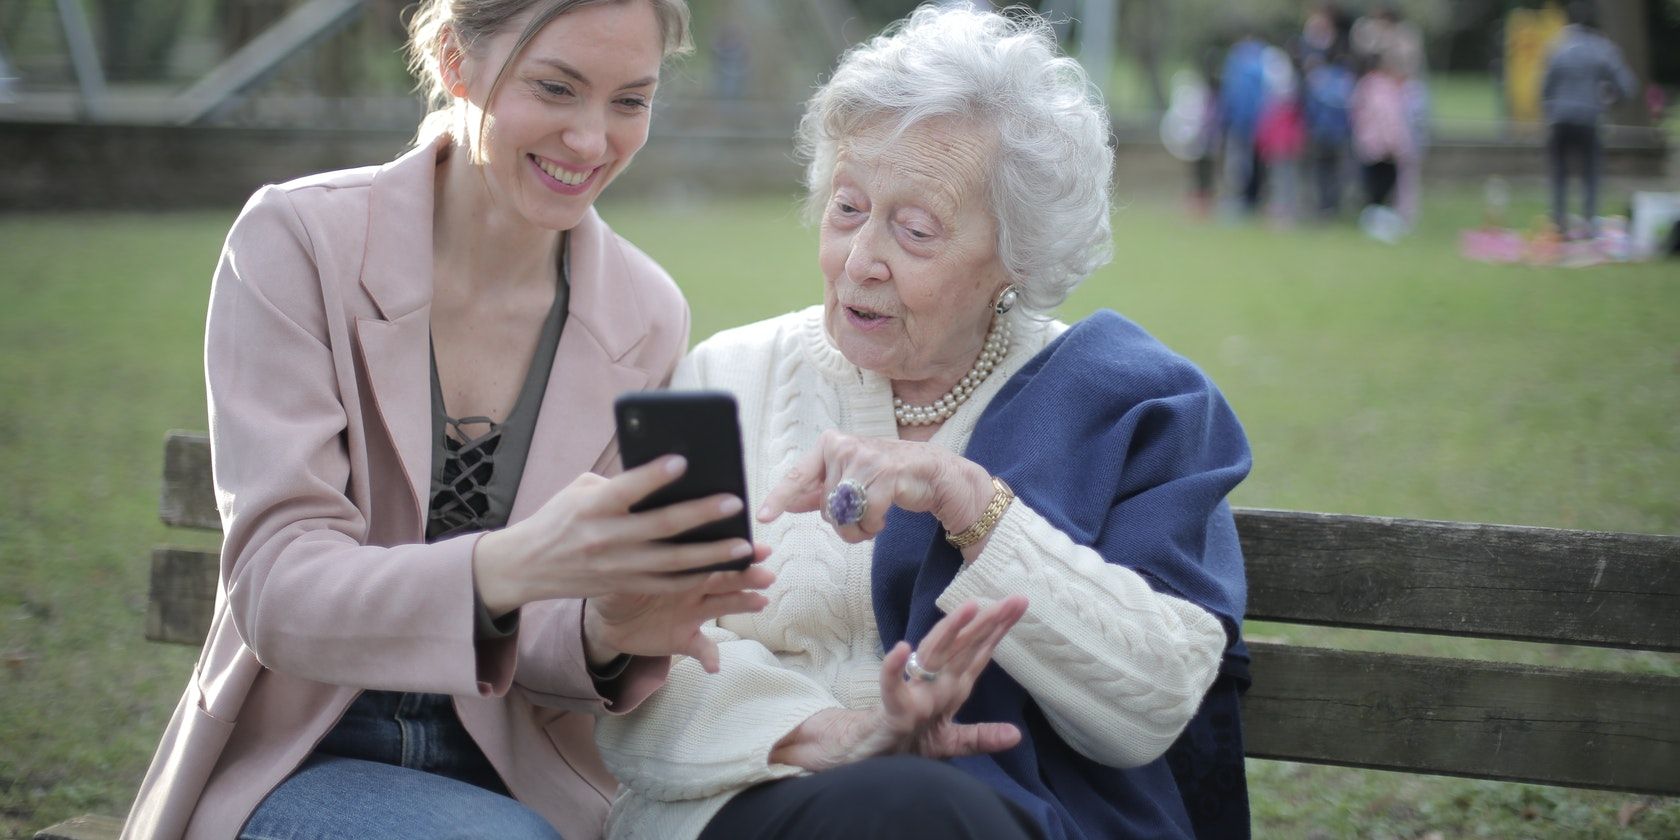 Two women, one young and one old, using a cell phone on a park bench.